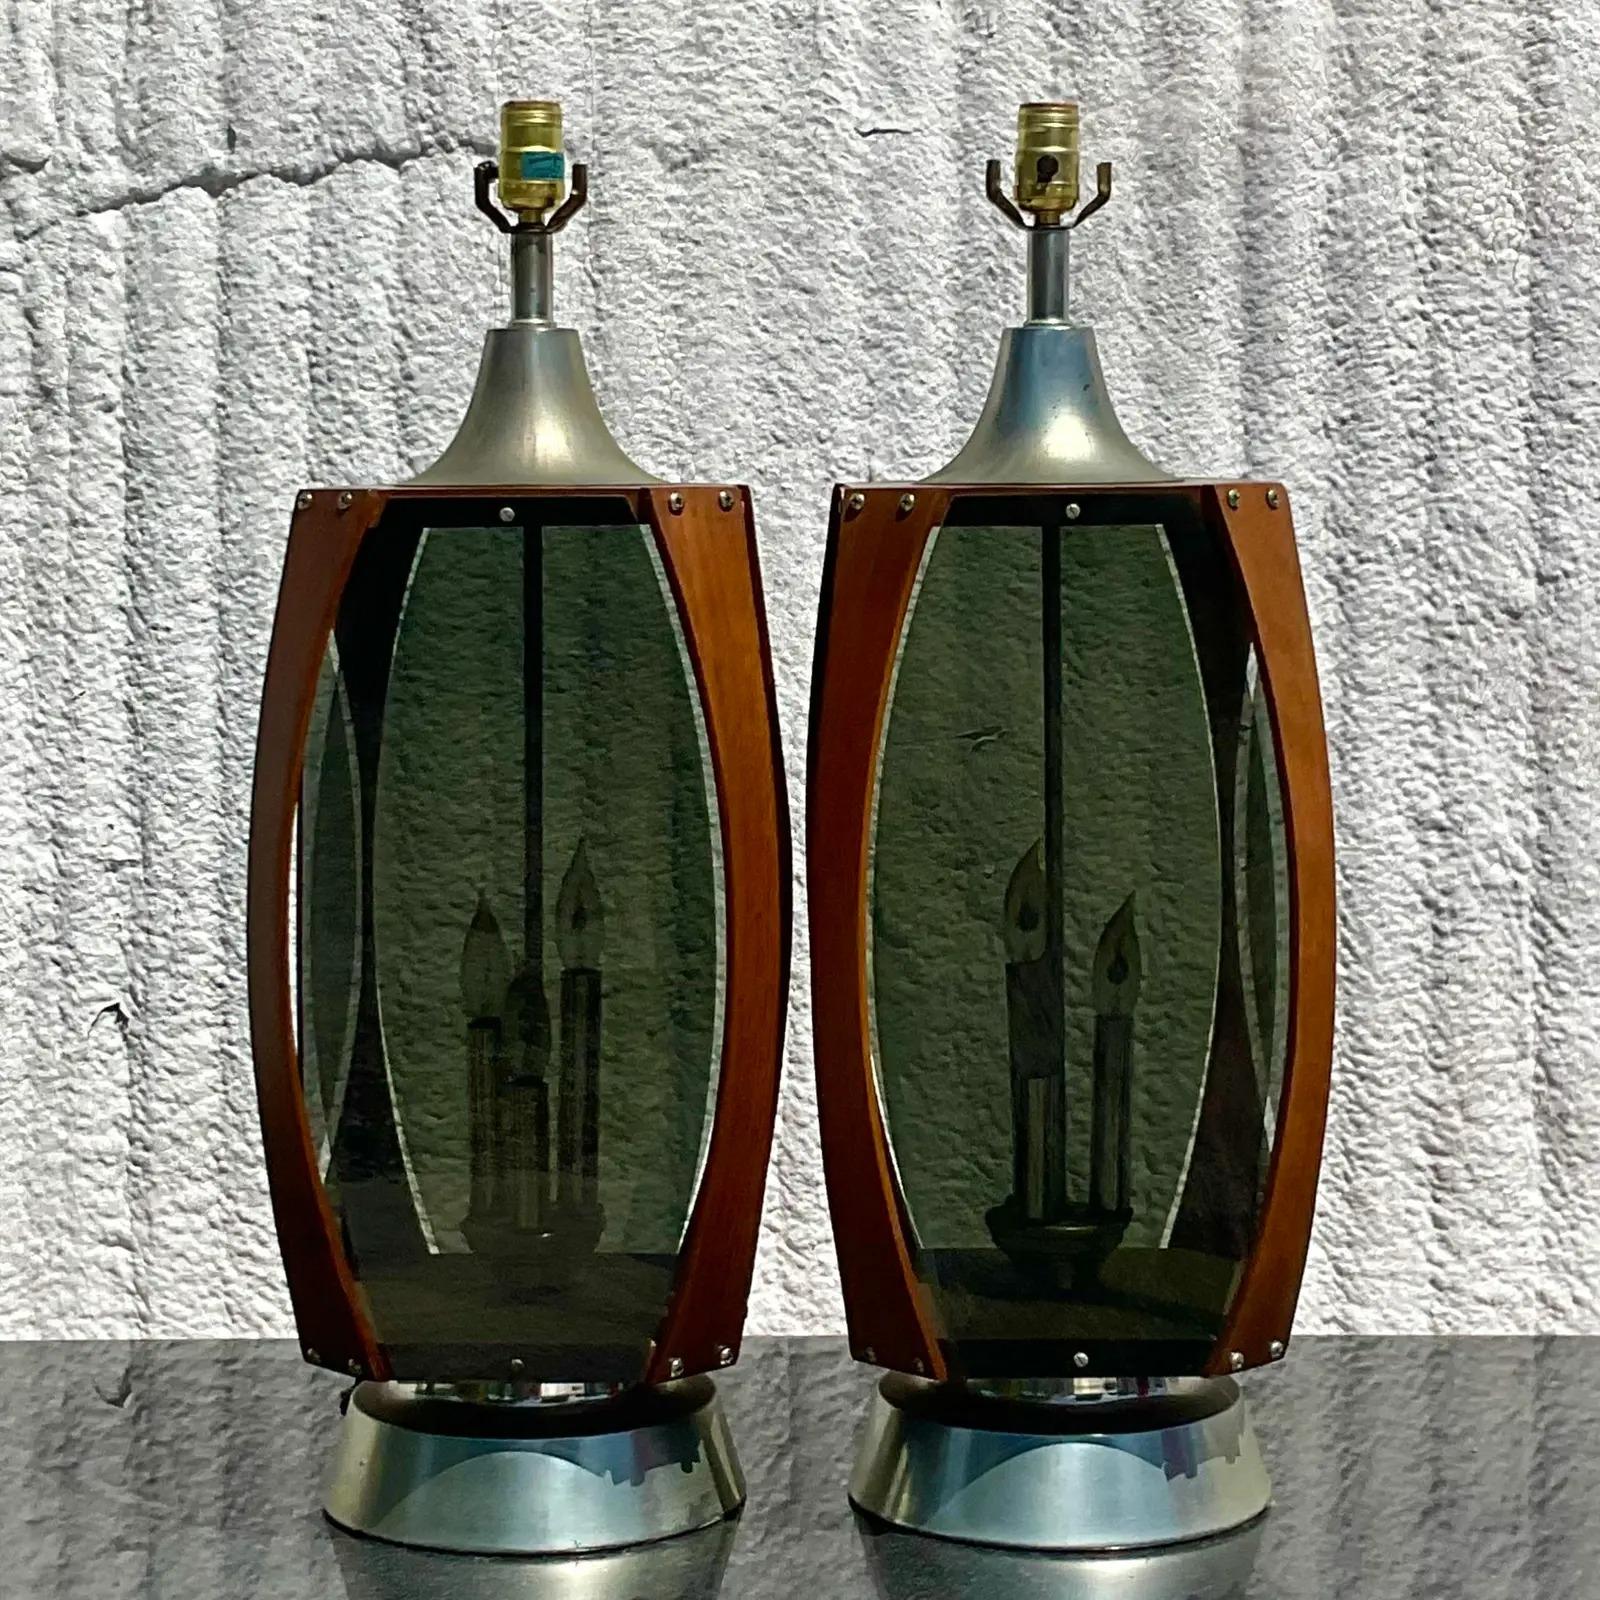 Vintage pair of MCM table lamps. Beautiful teak wood frame with smoked glass panels. Interior candle lights inside. Acquired from a Palm Beach estate.